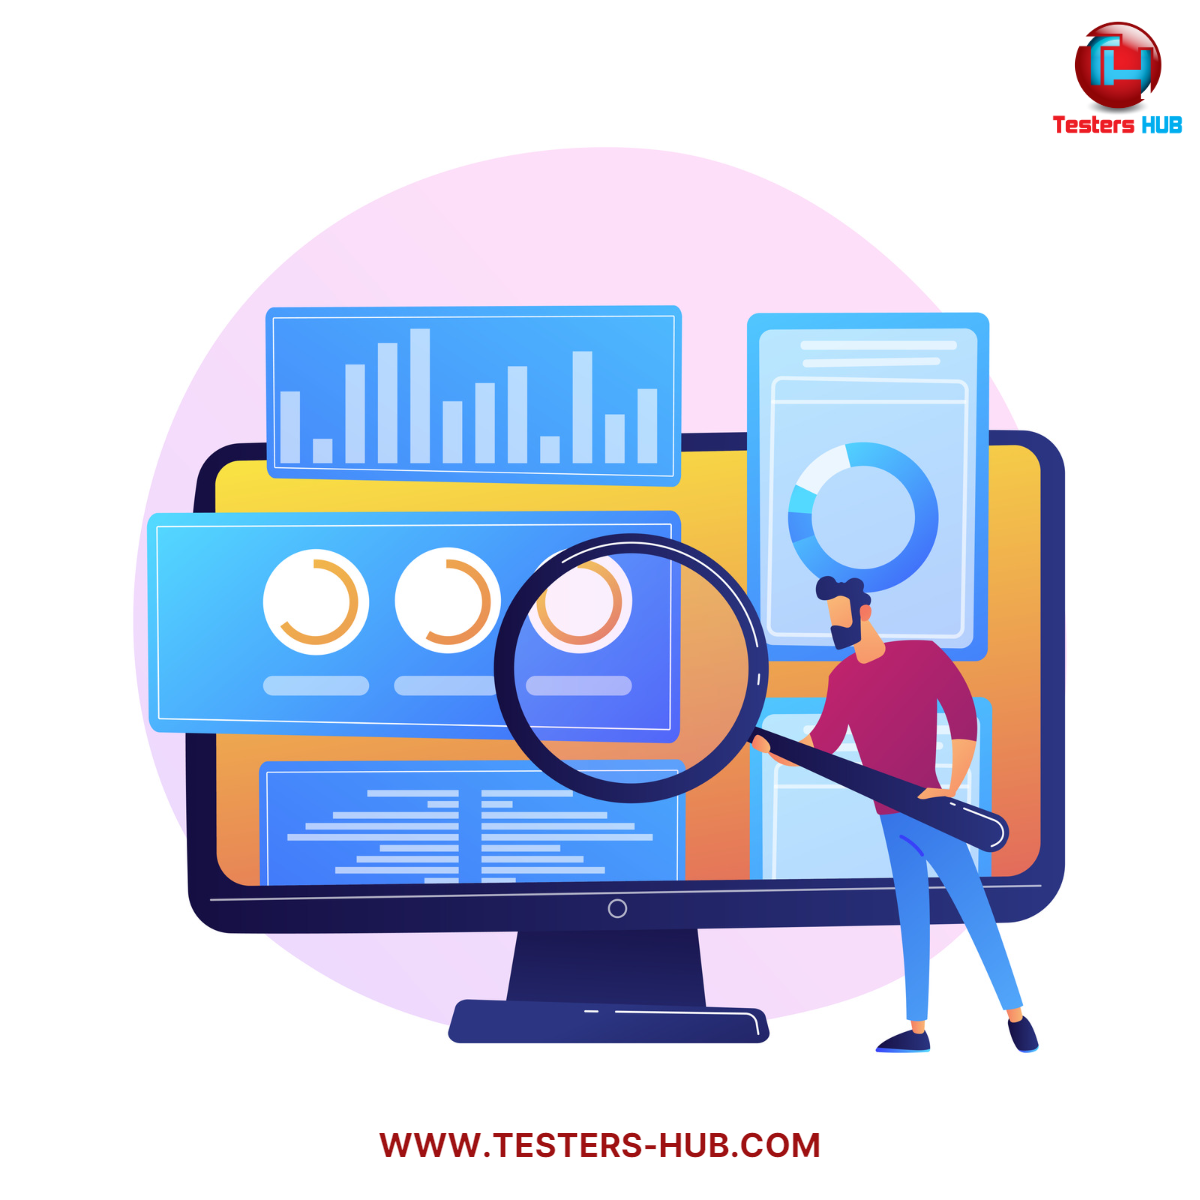 Cypress Automation Testing Tool